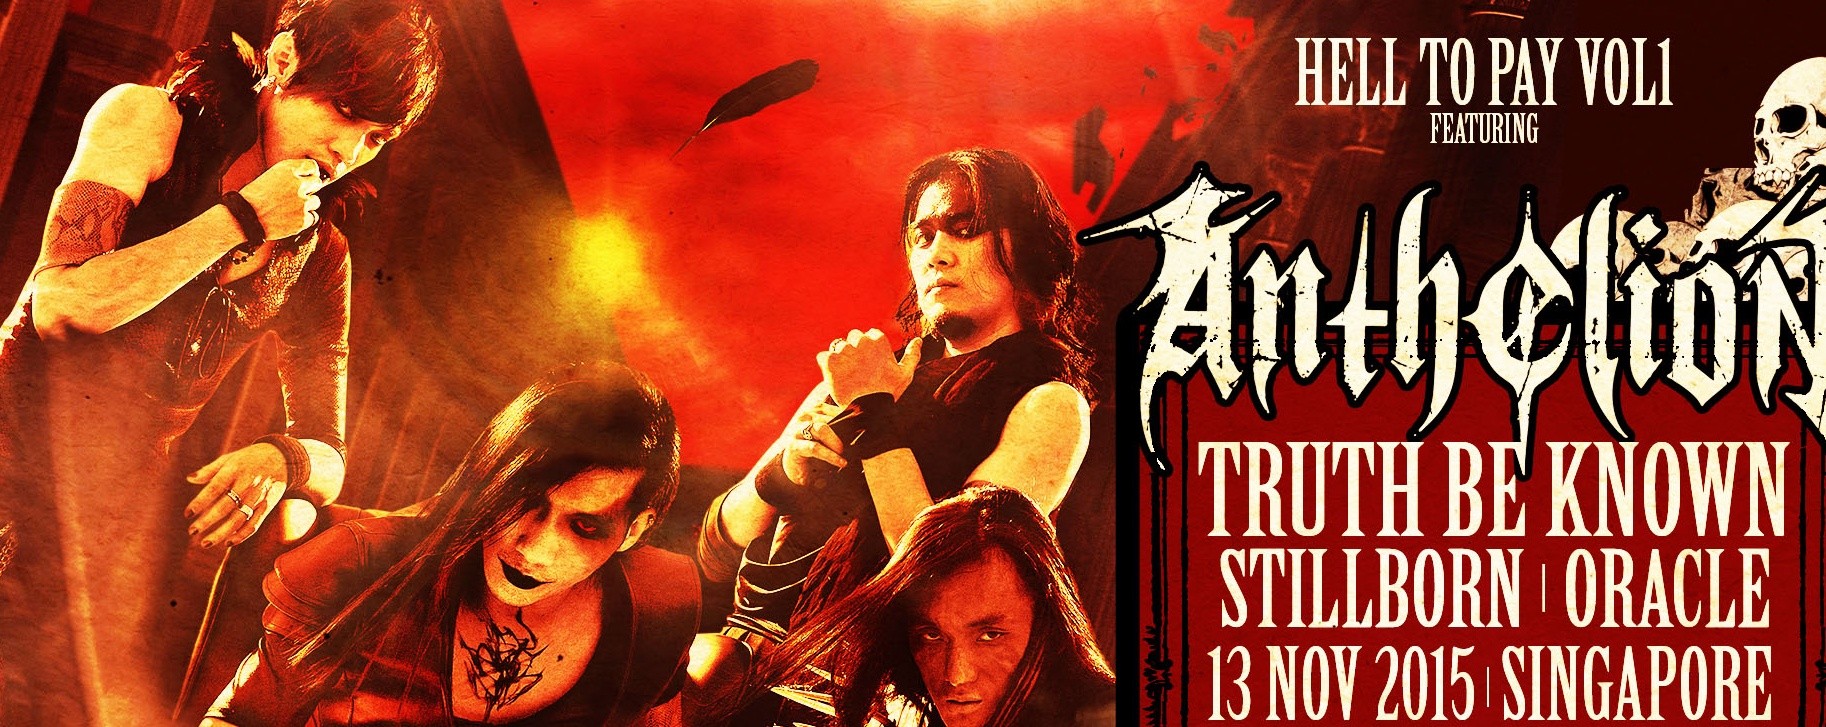 Hell to Pay vol1: Anthelion (Taiwan) Live in Singapore